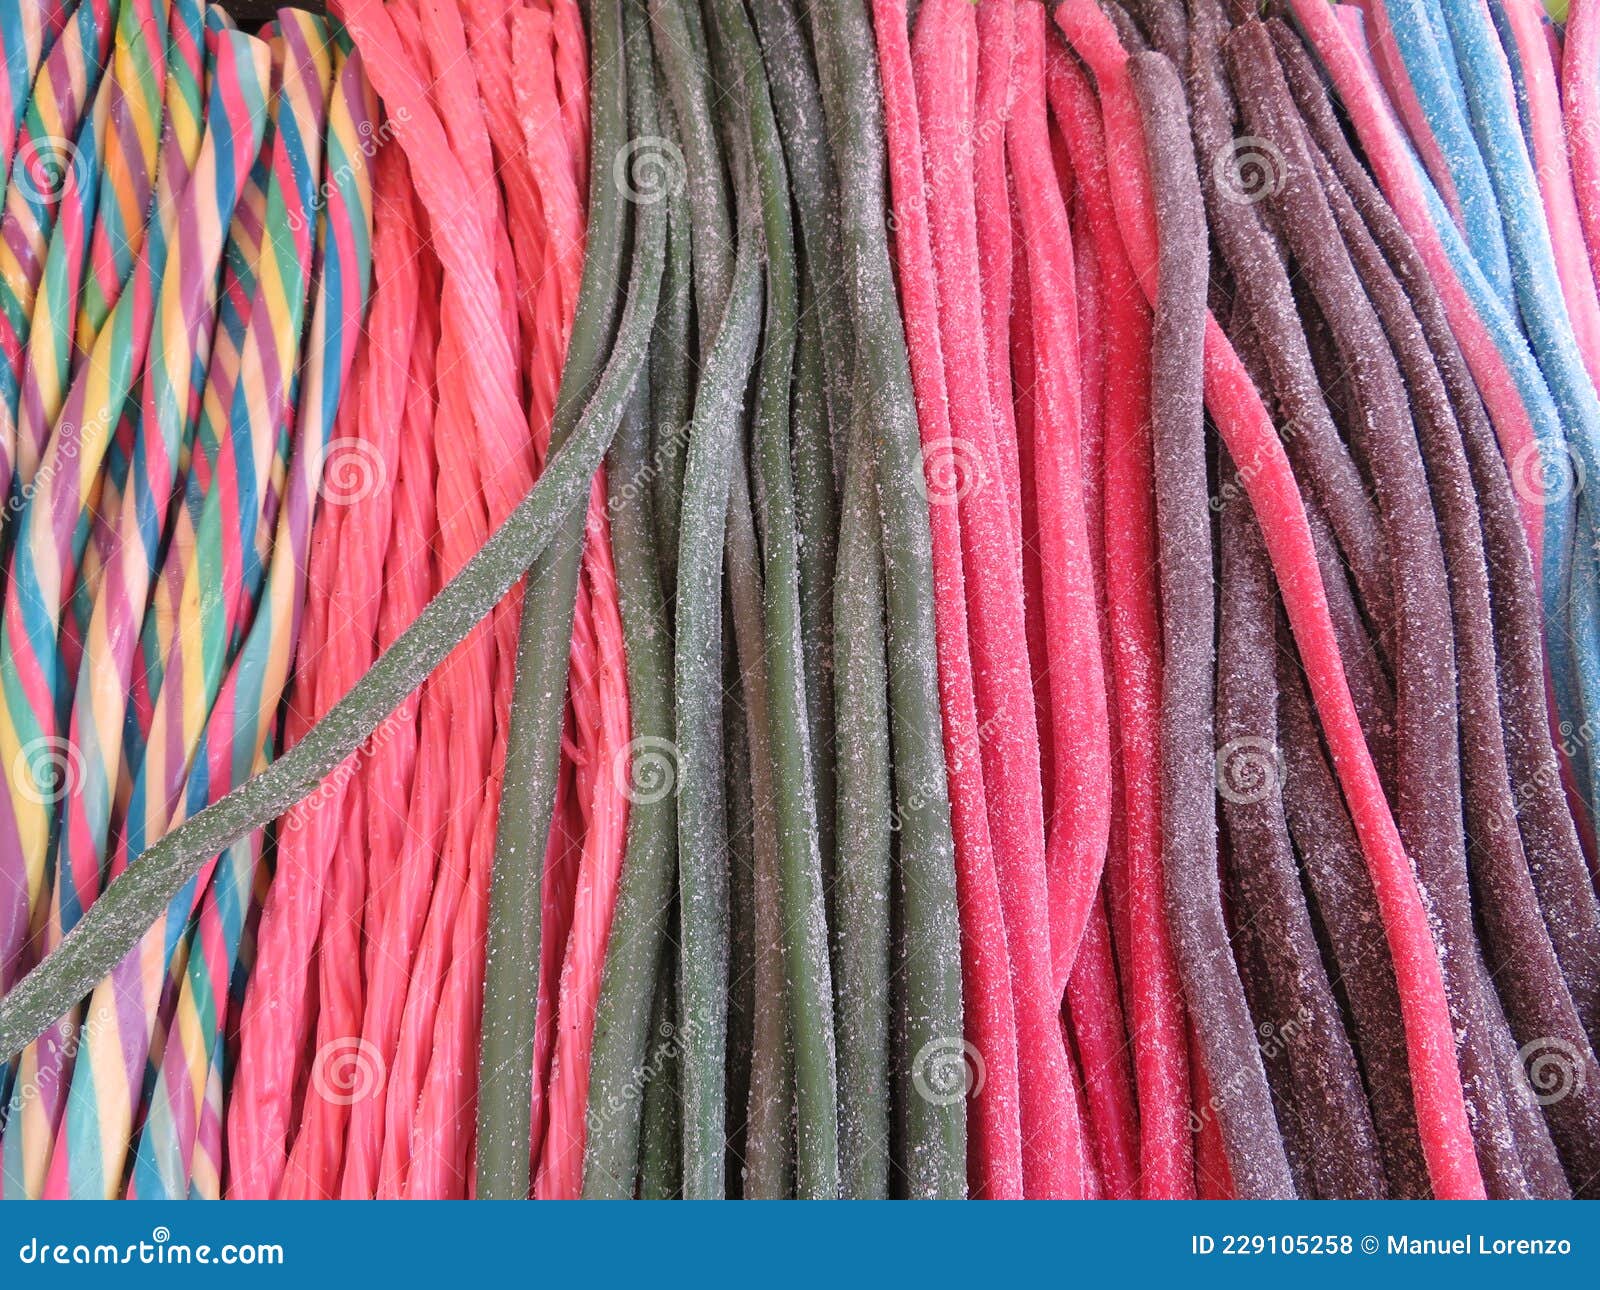 delicious licorice colors and flavors sizes sweet s